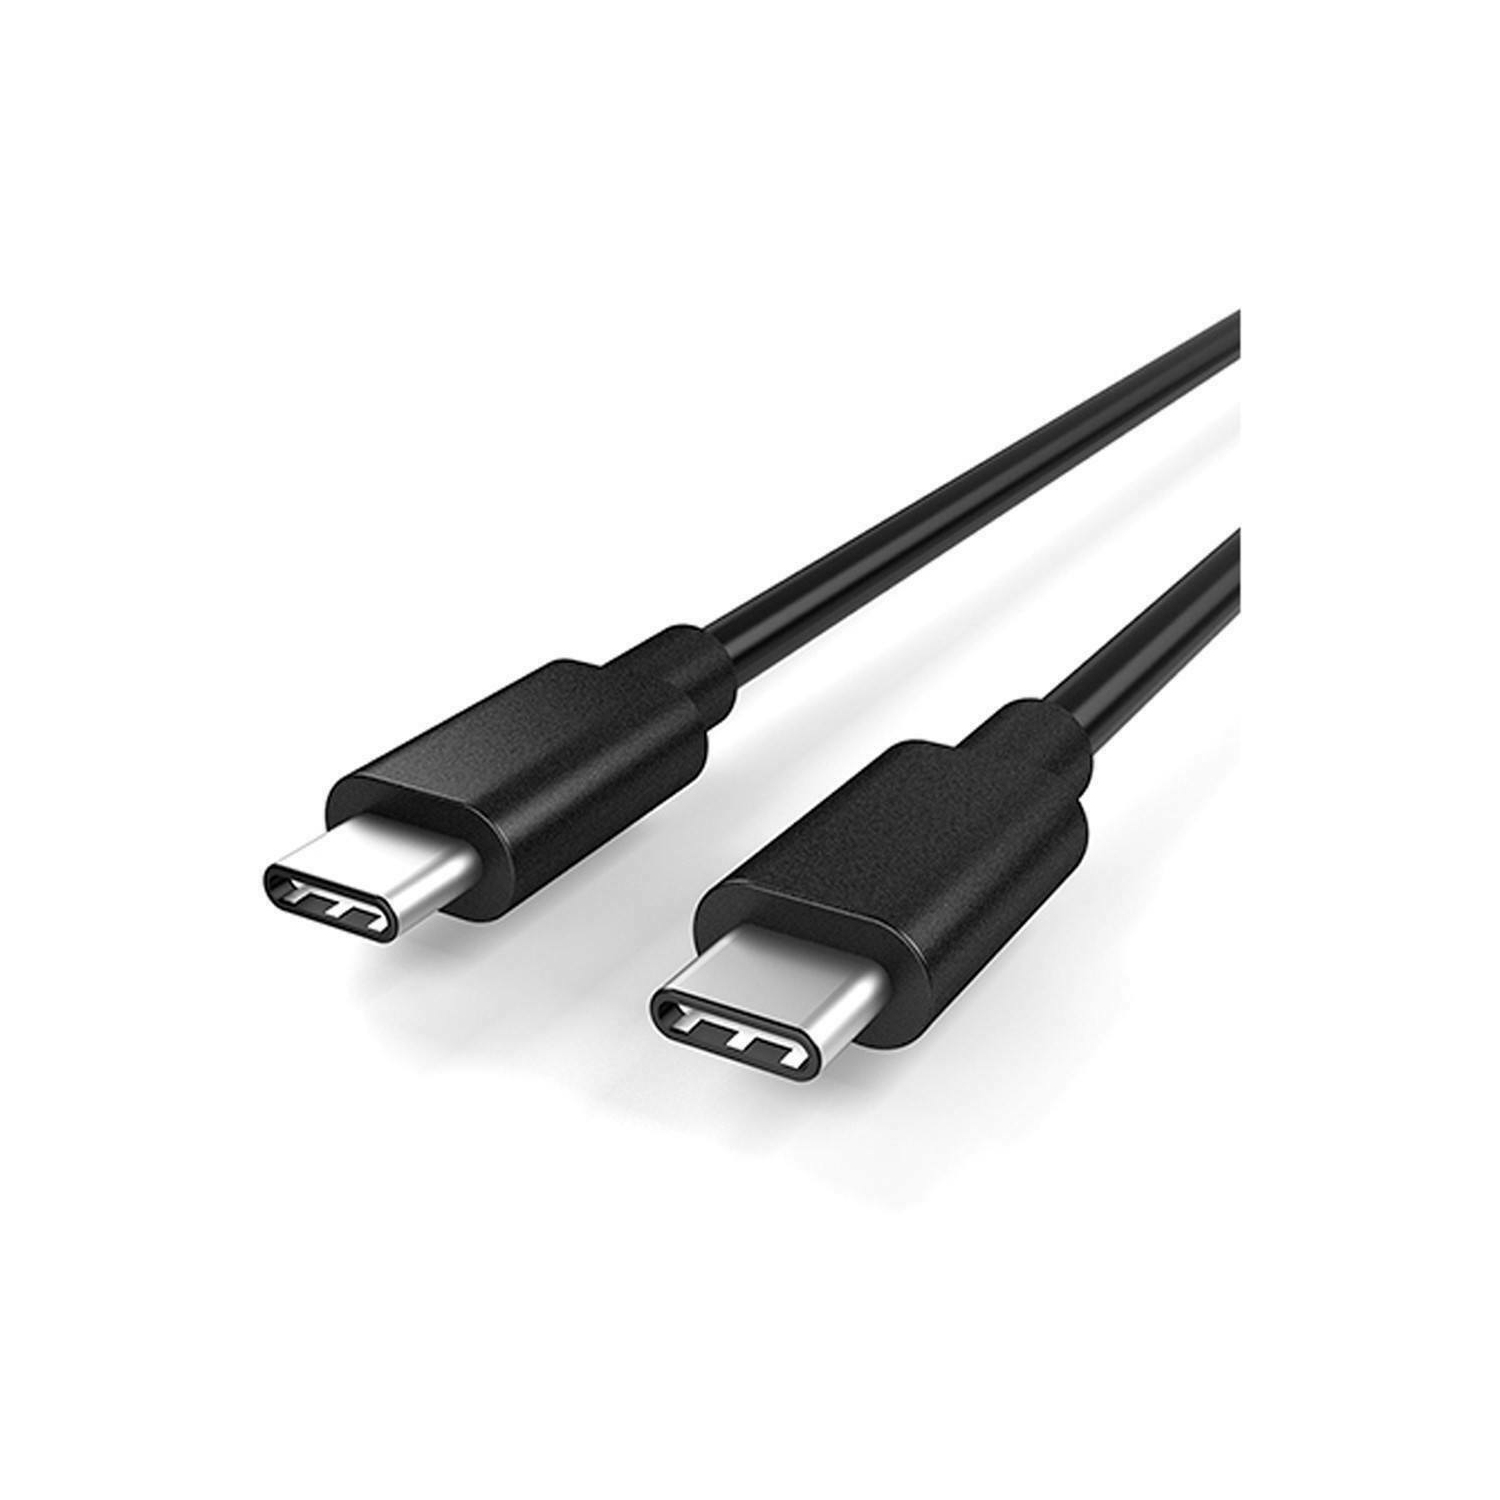 (3Ft/1M) USB 3.1 Type USB C to USB C Fast Sync Charger Data Cable Cord for iPhone iPad Samsung LG Google, Black